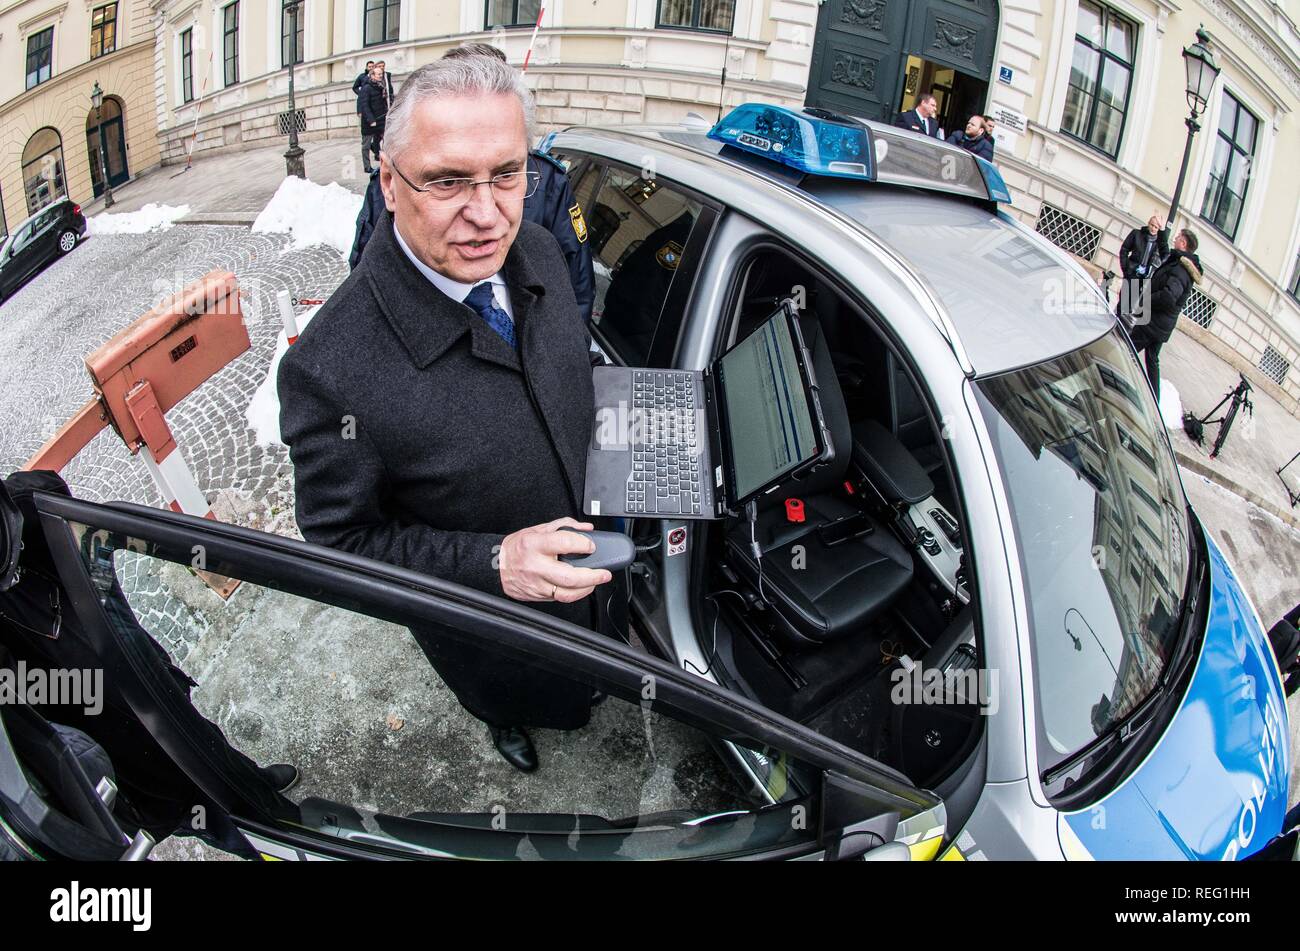 Munich, Bavaria, Germany. 21st Jan, 2019. Bavarian Interior Minister JOACHIM HERRMANN and Hubert Weiss of the Passau Border Police with the vehicles of the Bavarian Border Police in a display of their equipment and their capabilities. The Bavarian Innenminister Joachim Herrmann and the Direktor der Bayerischen Grenzpolizei Alois Mannichl presented the half year statistics of the controversial border police (Grenzpolizei) that operates at the border crossings between Germany and Austria. Herrmann announced plans to double the border protection police by 2023 and also outfit the personnel w Cred Stock Photo